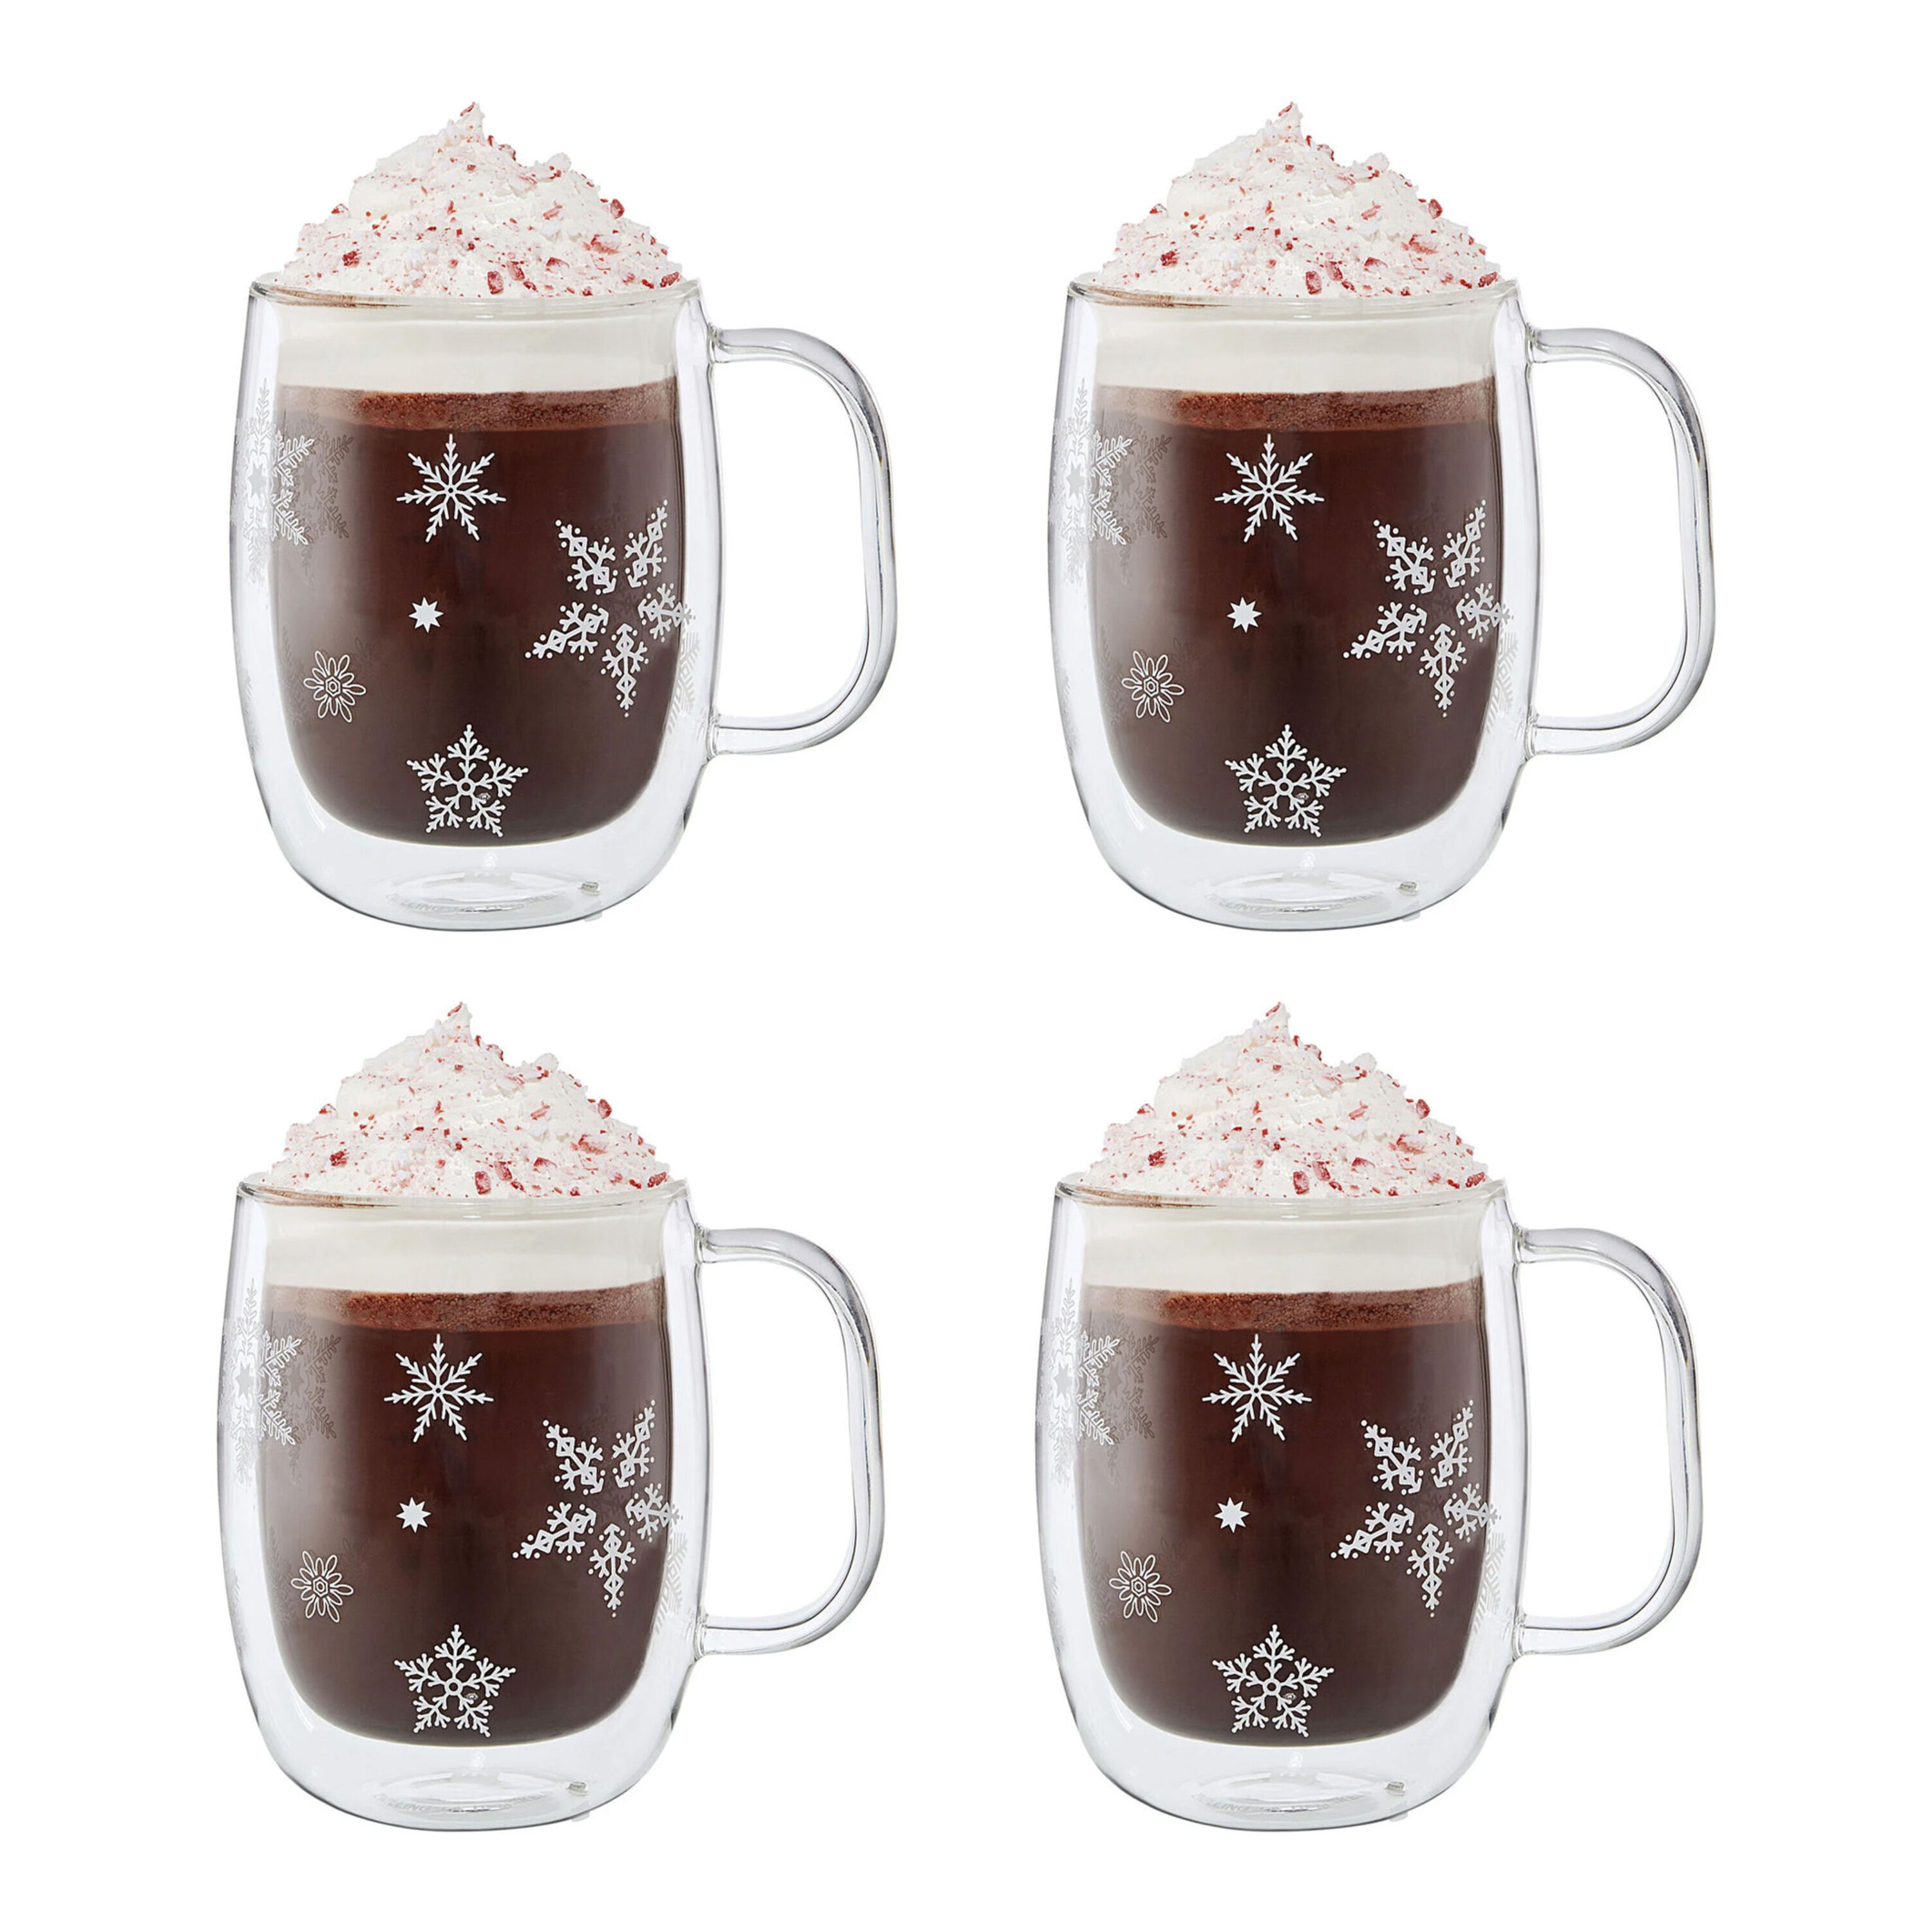 https://www.zwilling.com/on/demandware.static/-/Sites-zwilling-master-catalog/default/dw49b83b4a/images/large/1019476_39500-116_Snowflake_4pc_set.jpg